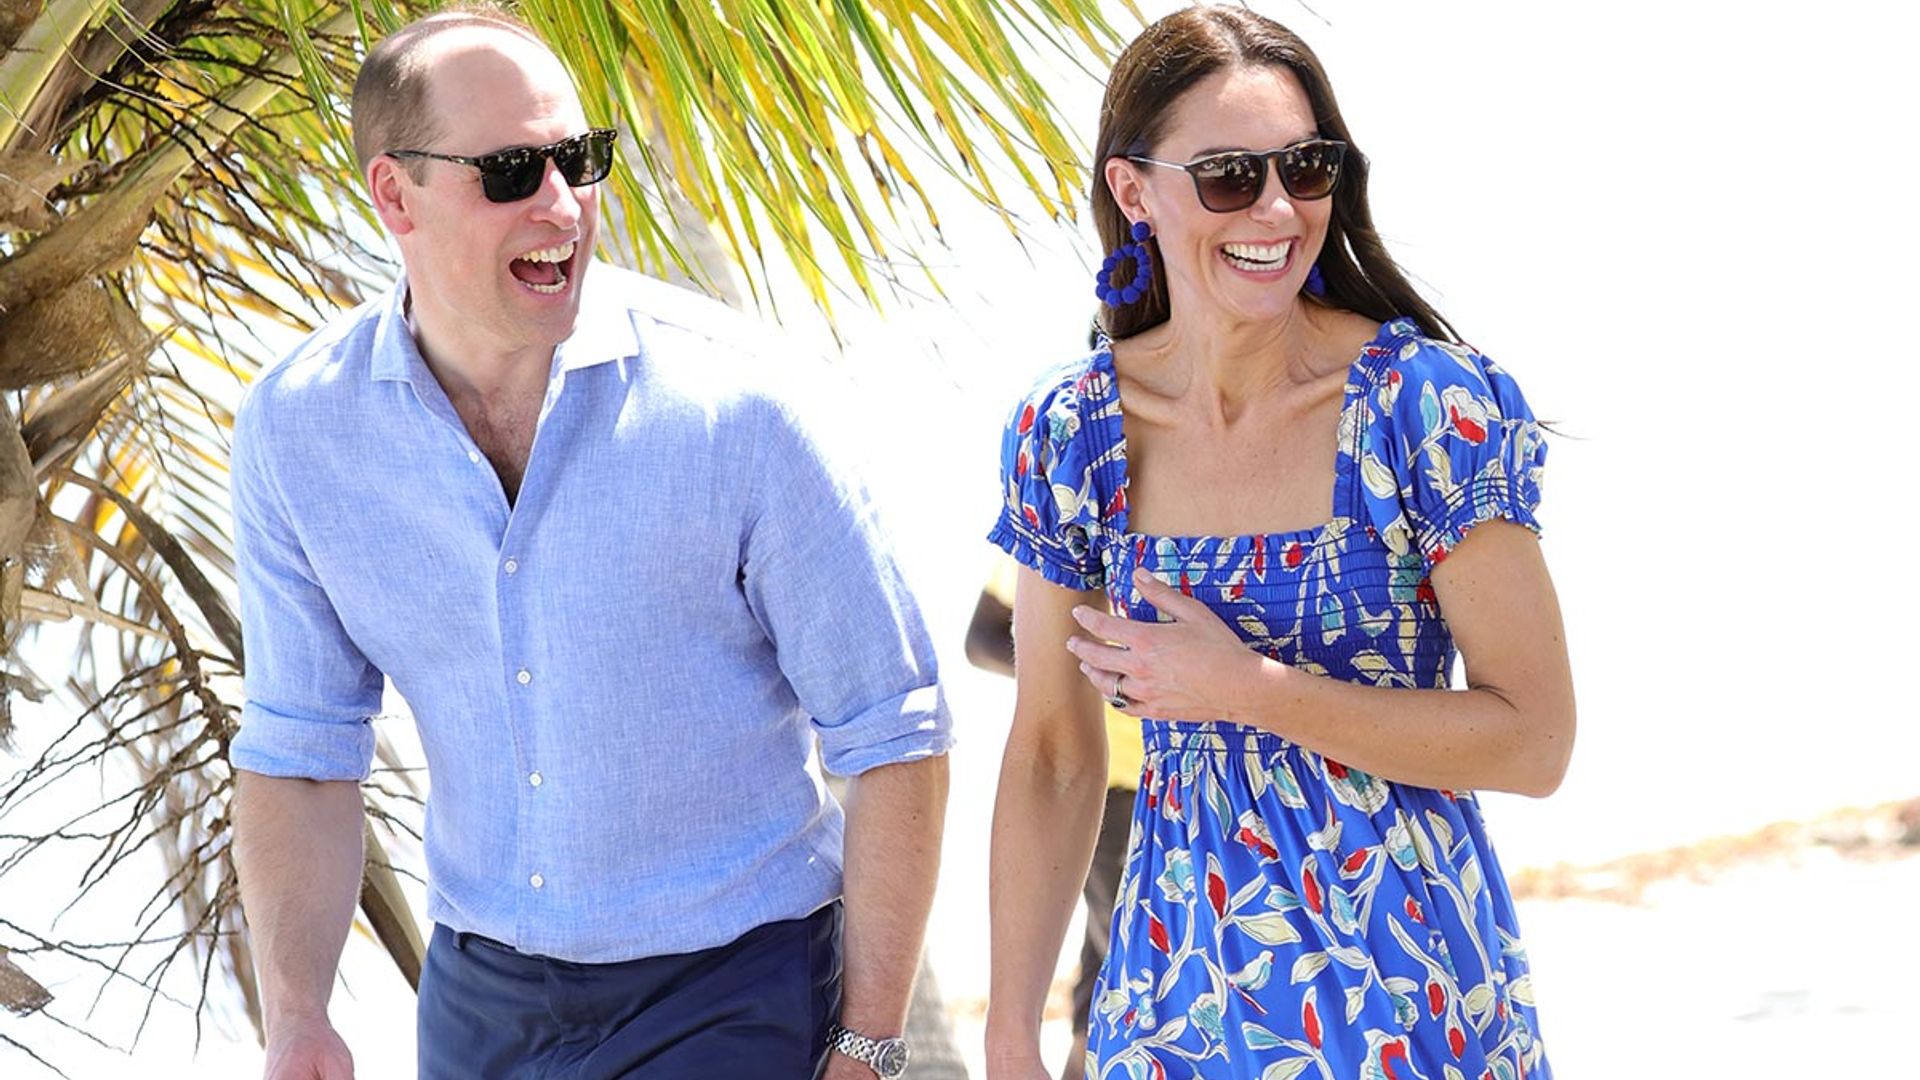 Prince William's incredible gift for 40th birthday – revealed